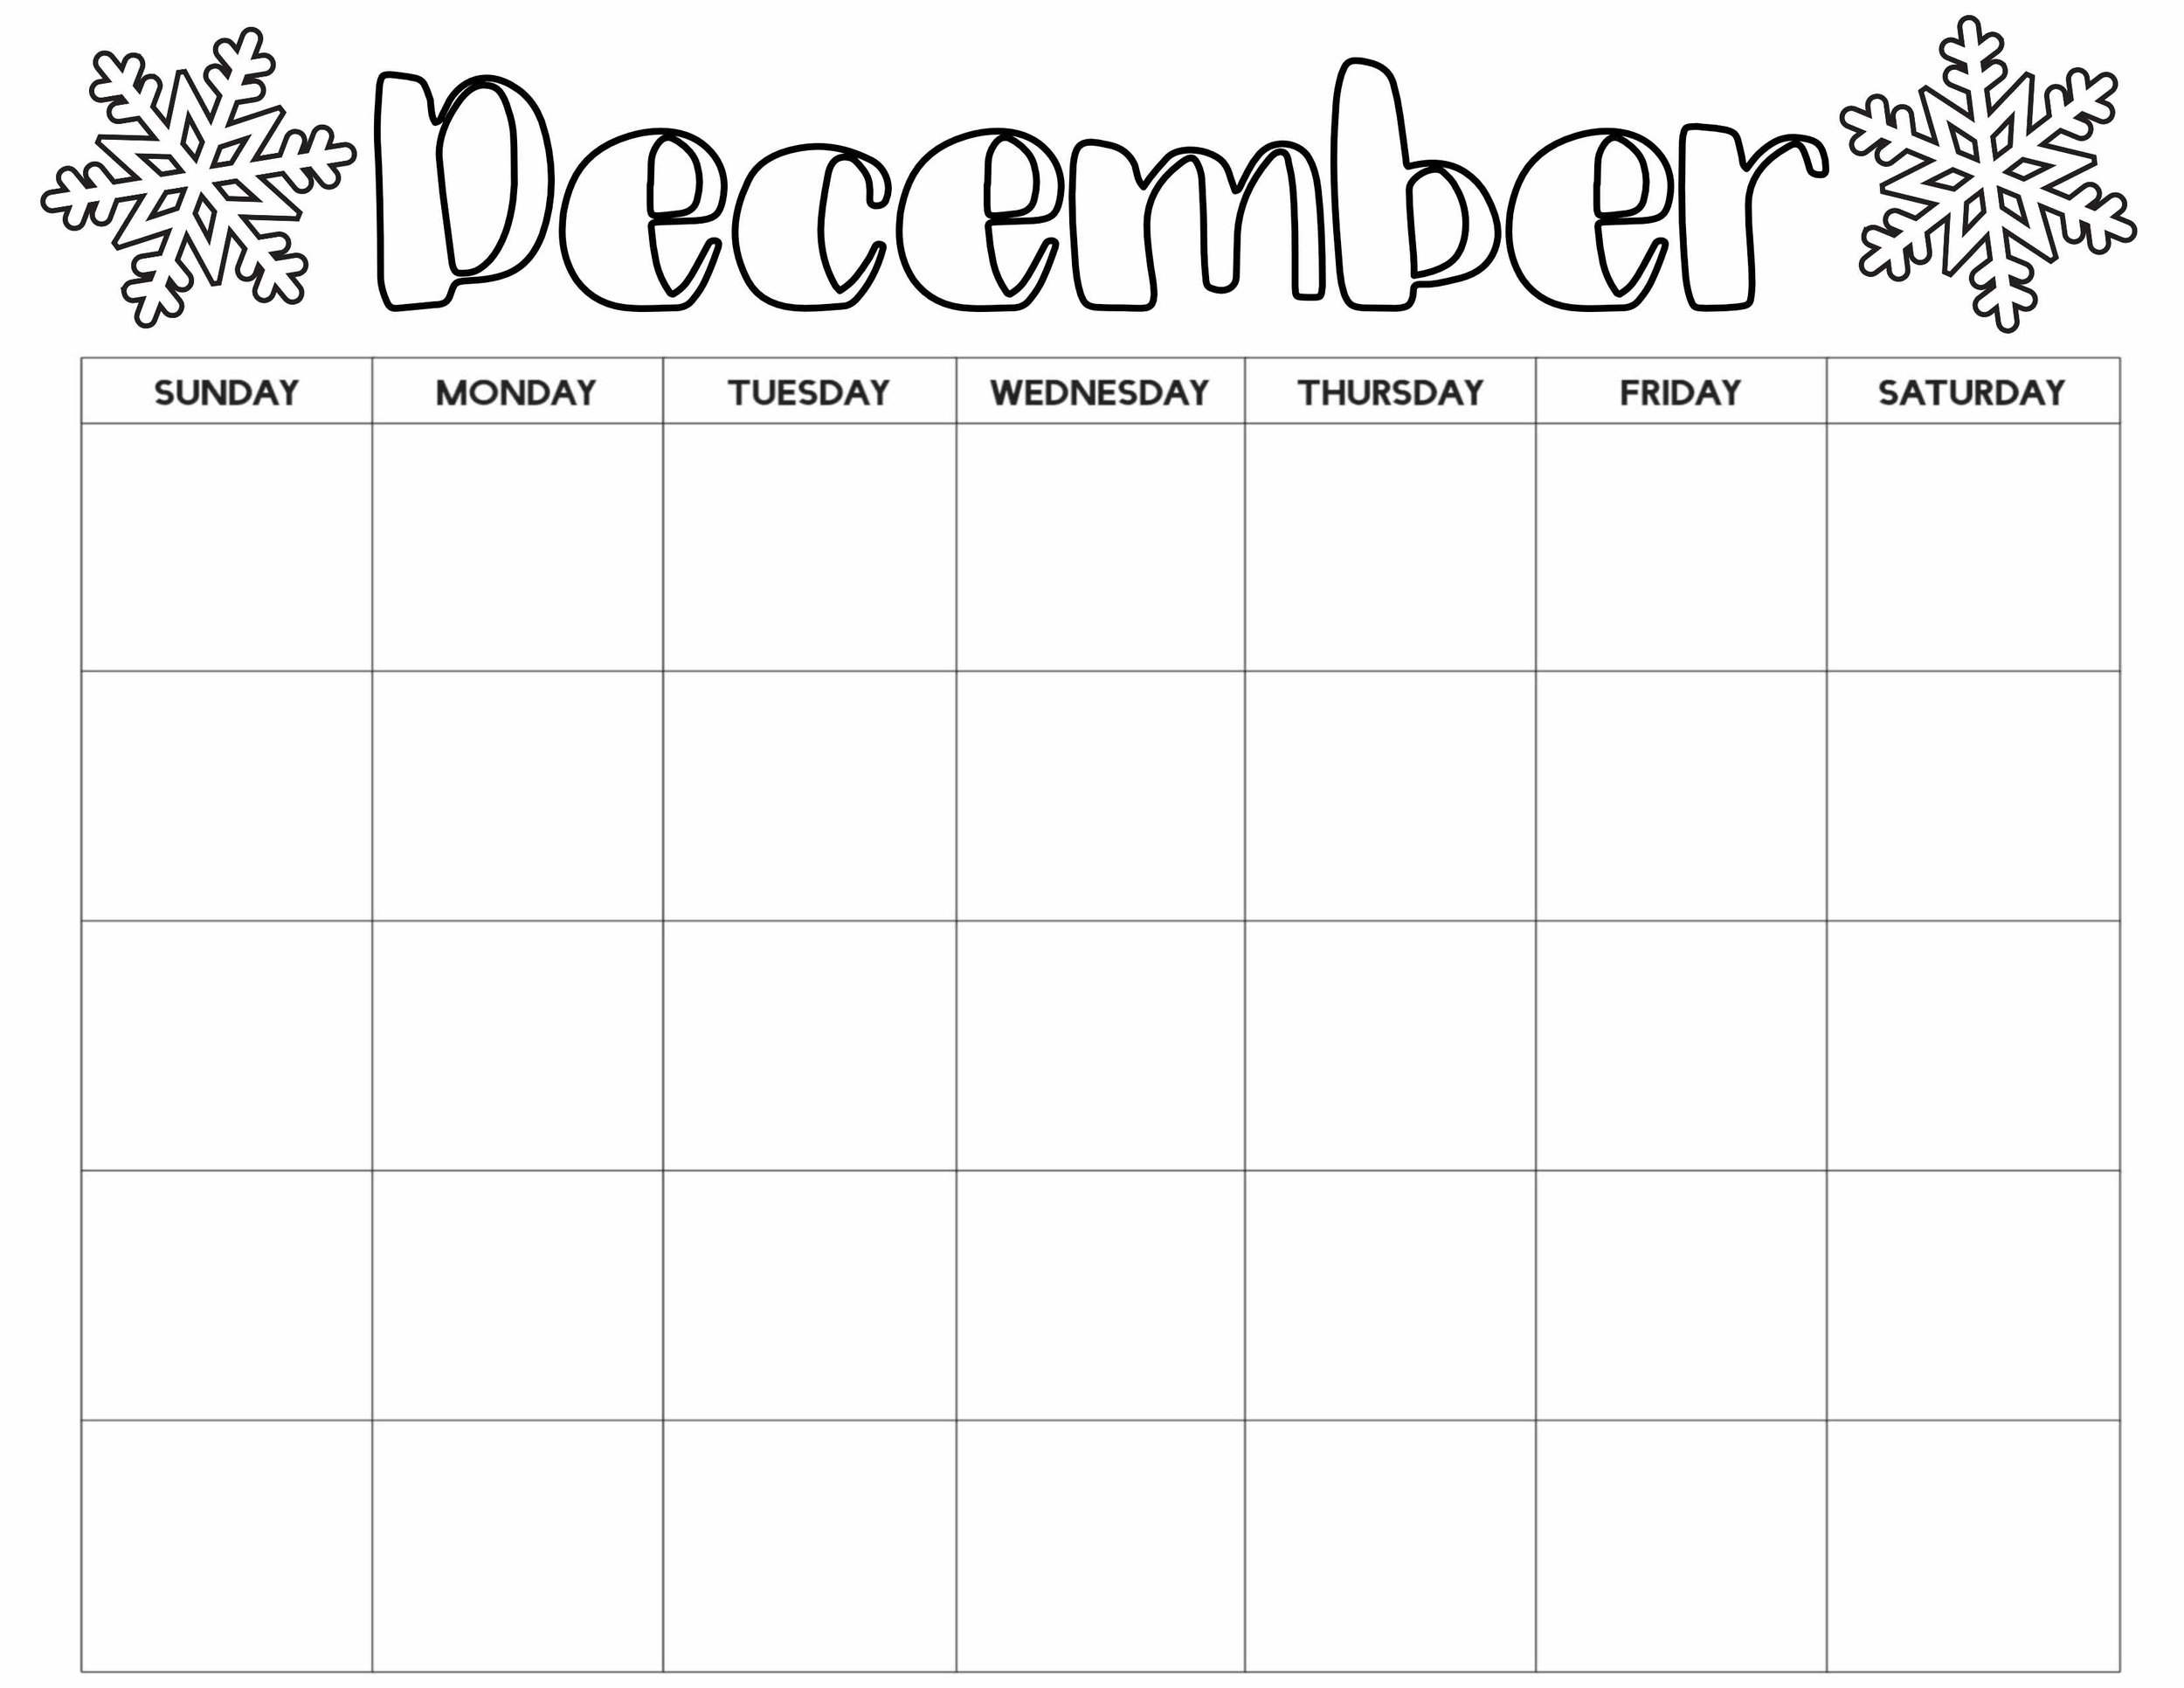 colorable text "December" with snowflakes on either side above a calendar